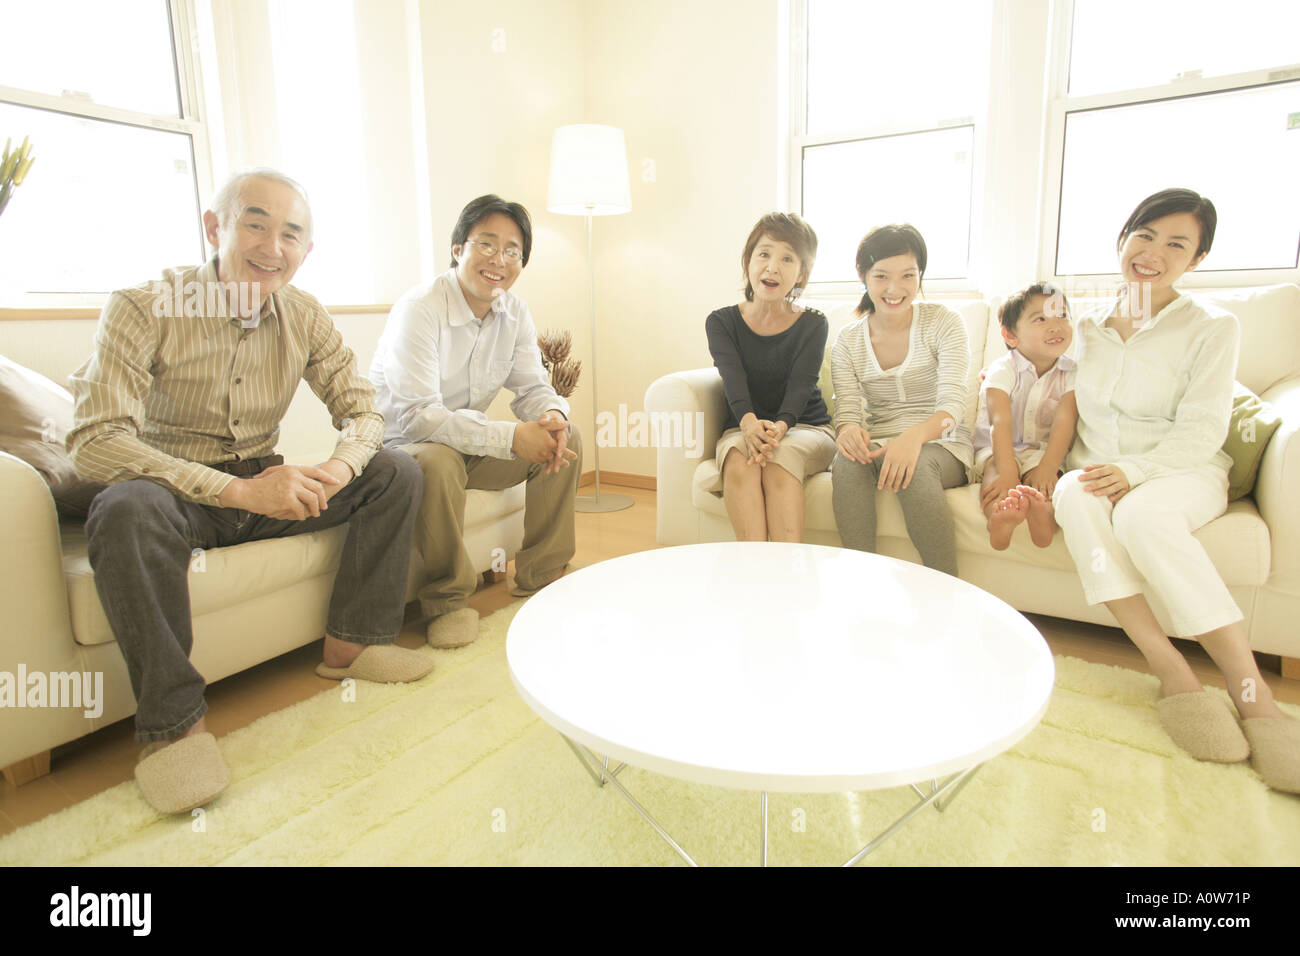 Portrait of a three generation family sitting in a living room and smiling Stock Photo